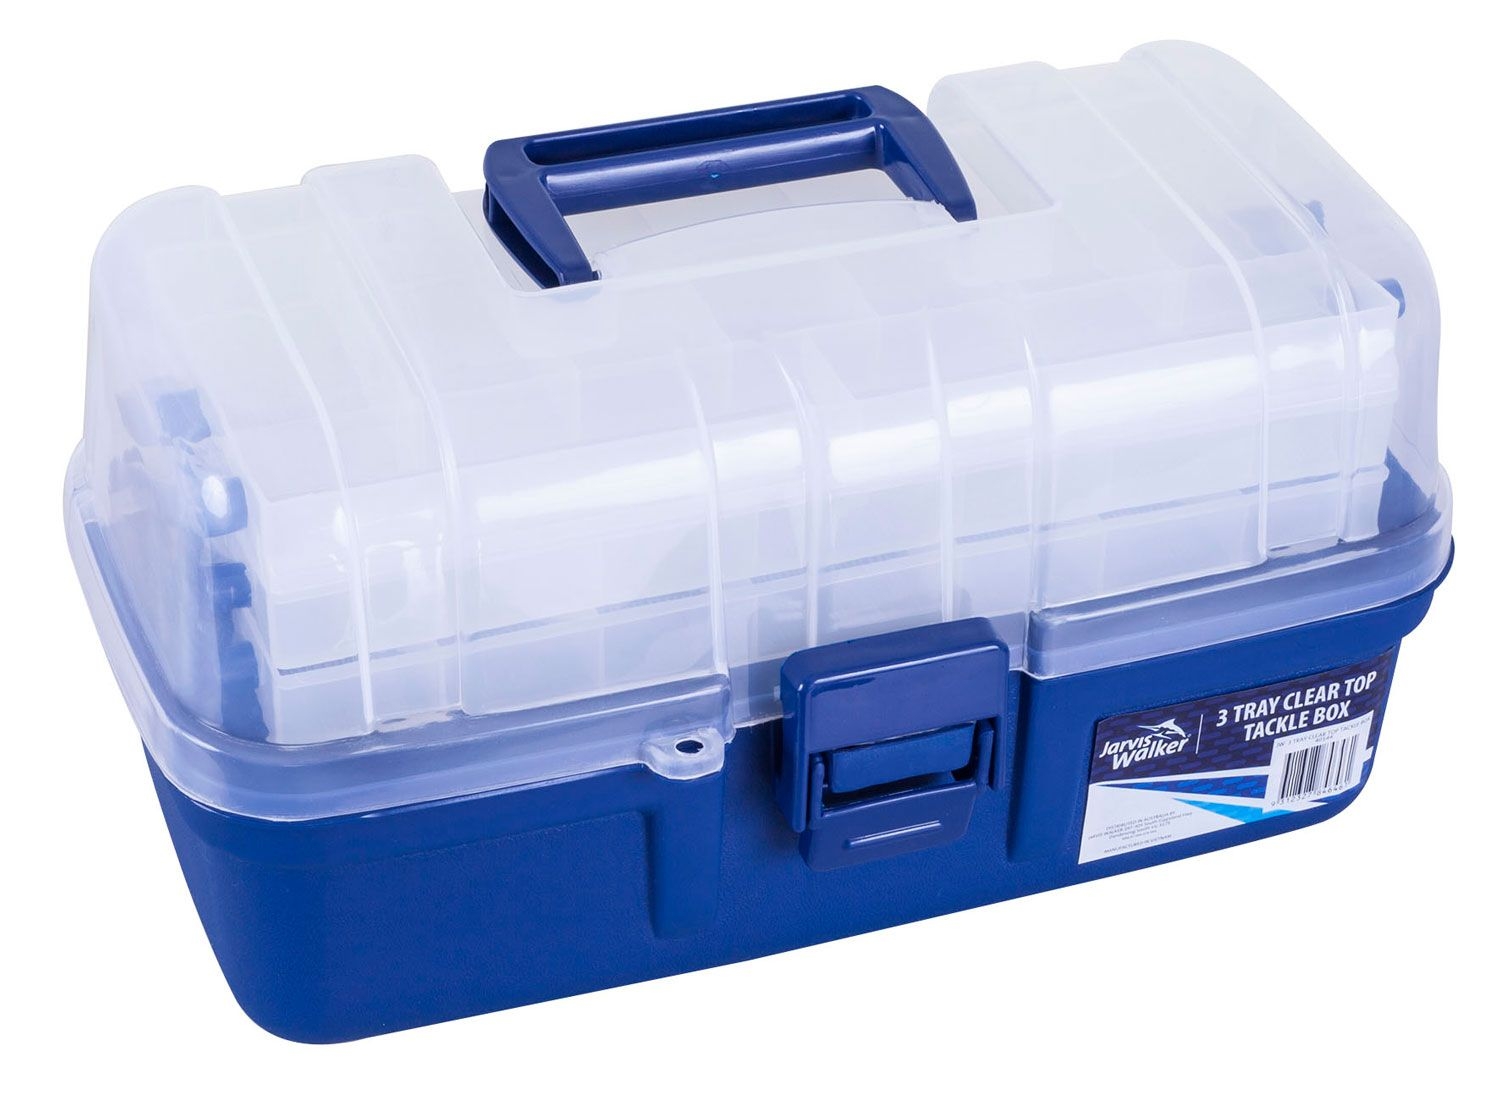 https://www.coopersbeachsports.co.nz/img/product/jarvis-walker-clear-top-tackle-box-3-tray-3003560-1600.jpg